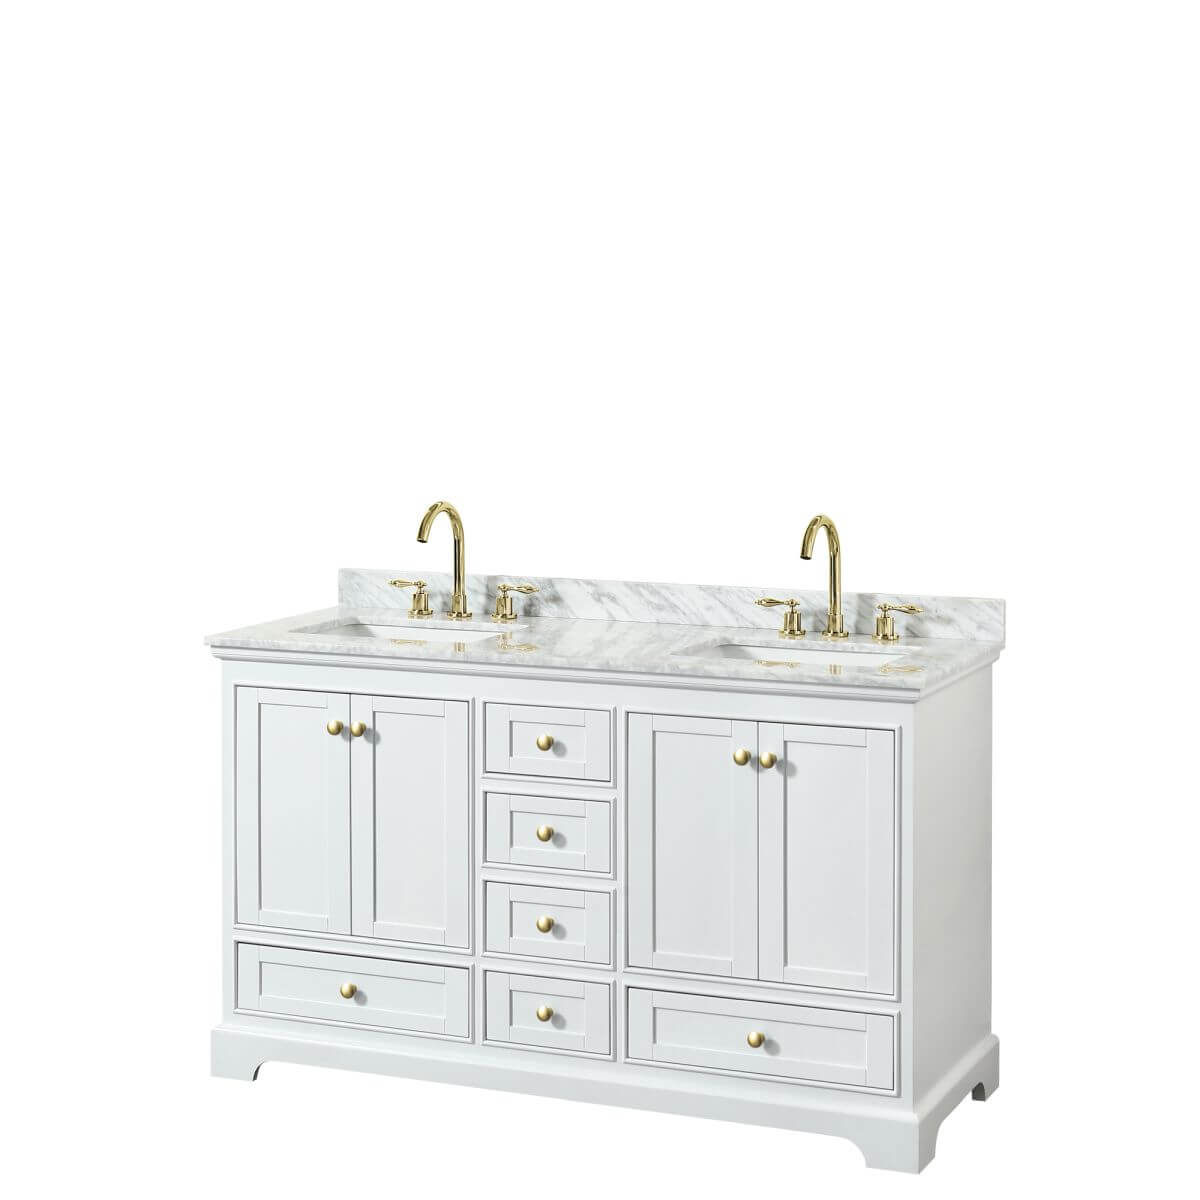 Wyndham Collection Deborah 60 inch Double Bathroom Vanity in White with White Carrara Marble Countertop, Undermount Square Sinks, Brushed Gold Trim and No Mirror - WCS202060DWGCMUNSMXX